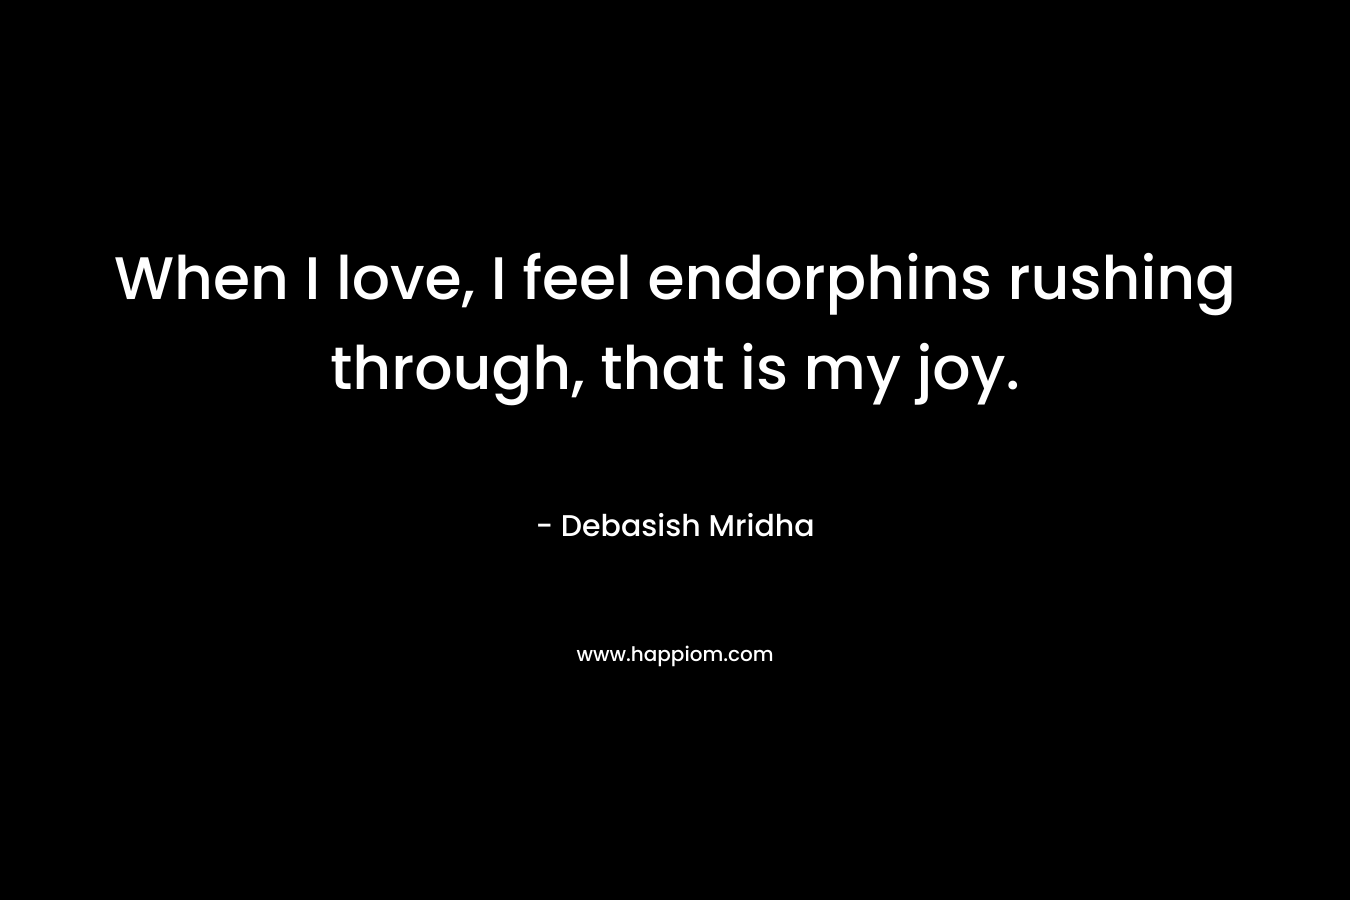 When I love, I feel endorphins rushing through, that is my joy.